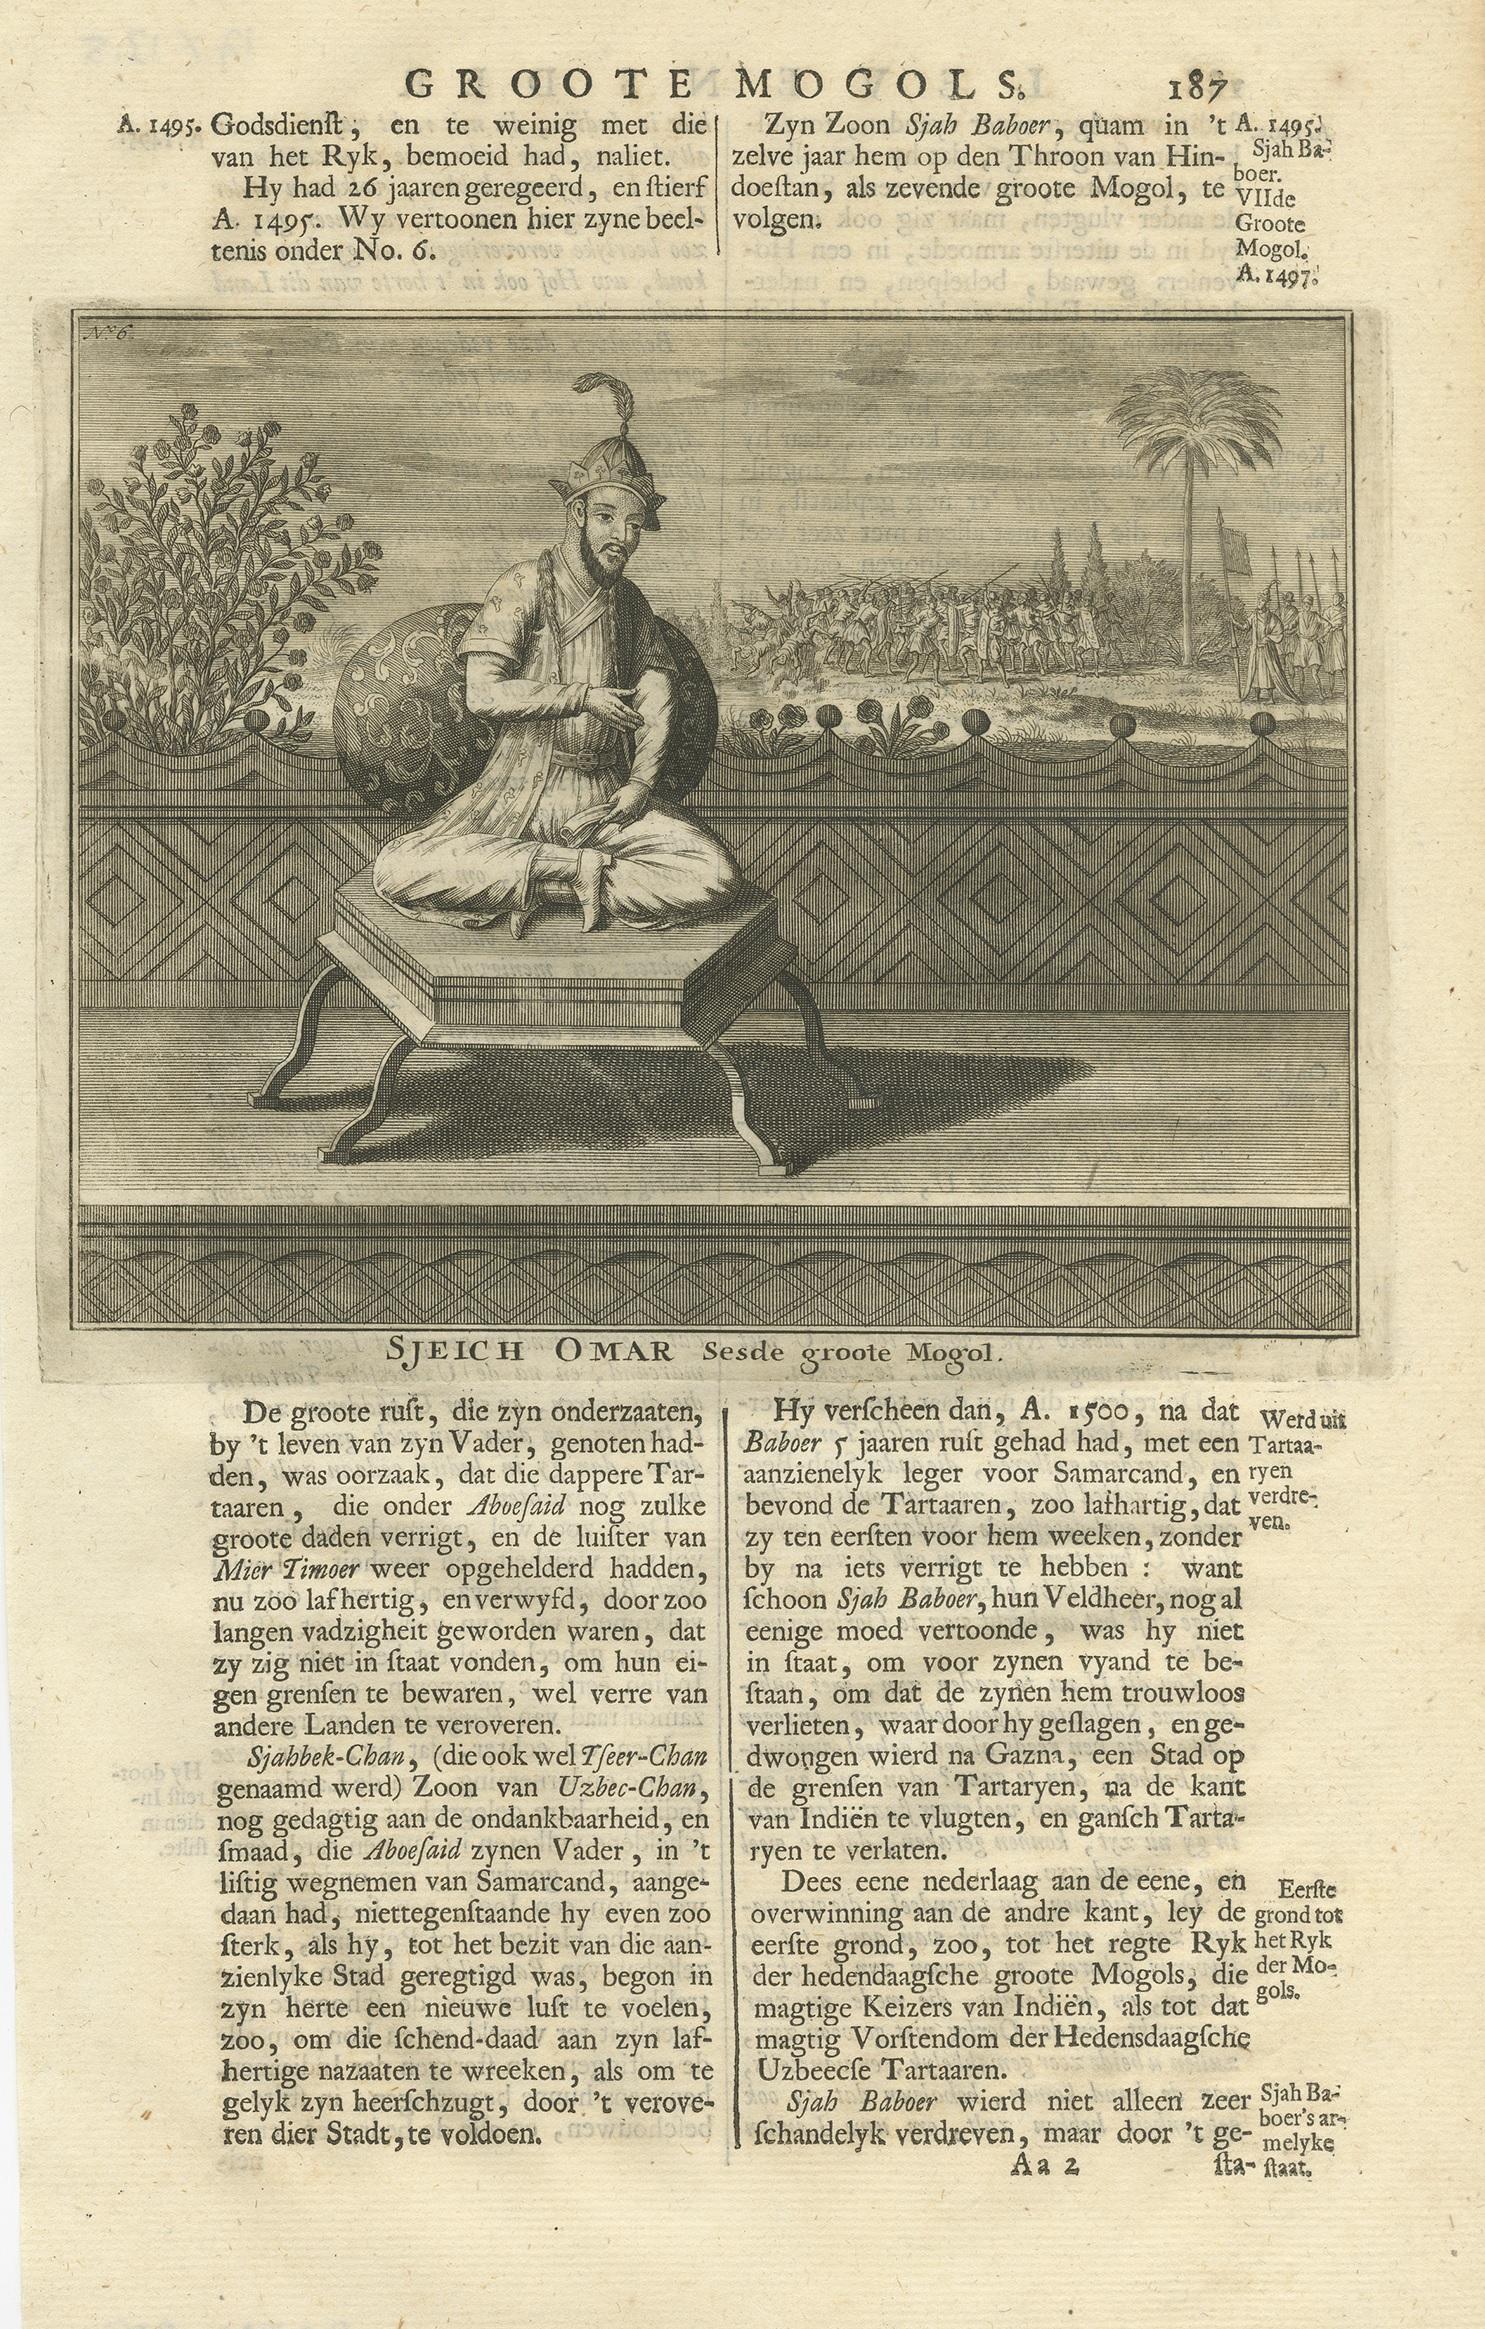 Antique print titled 'Sjeich Omar, Sesde Groote Mogol'. This print depicts Aurangzeb, the 6th Mughal Emperor. Text on verso. This print originates from 'Oud en Nieuw Oost-Indiën' by F. Valentijn.